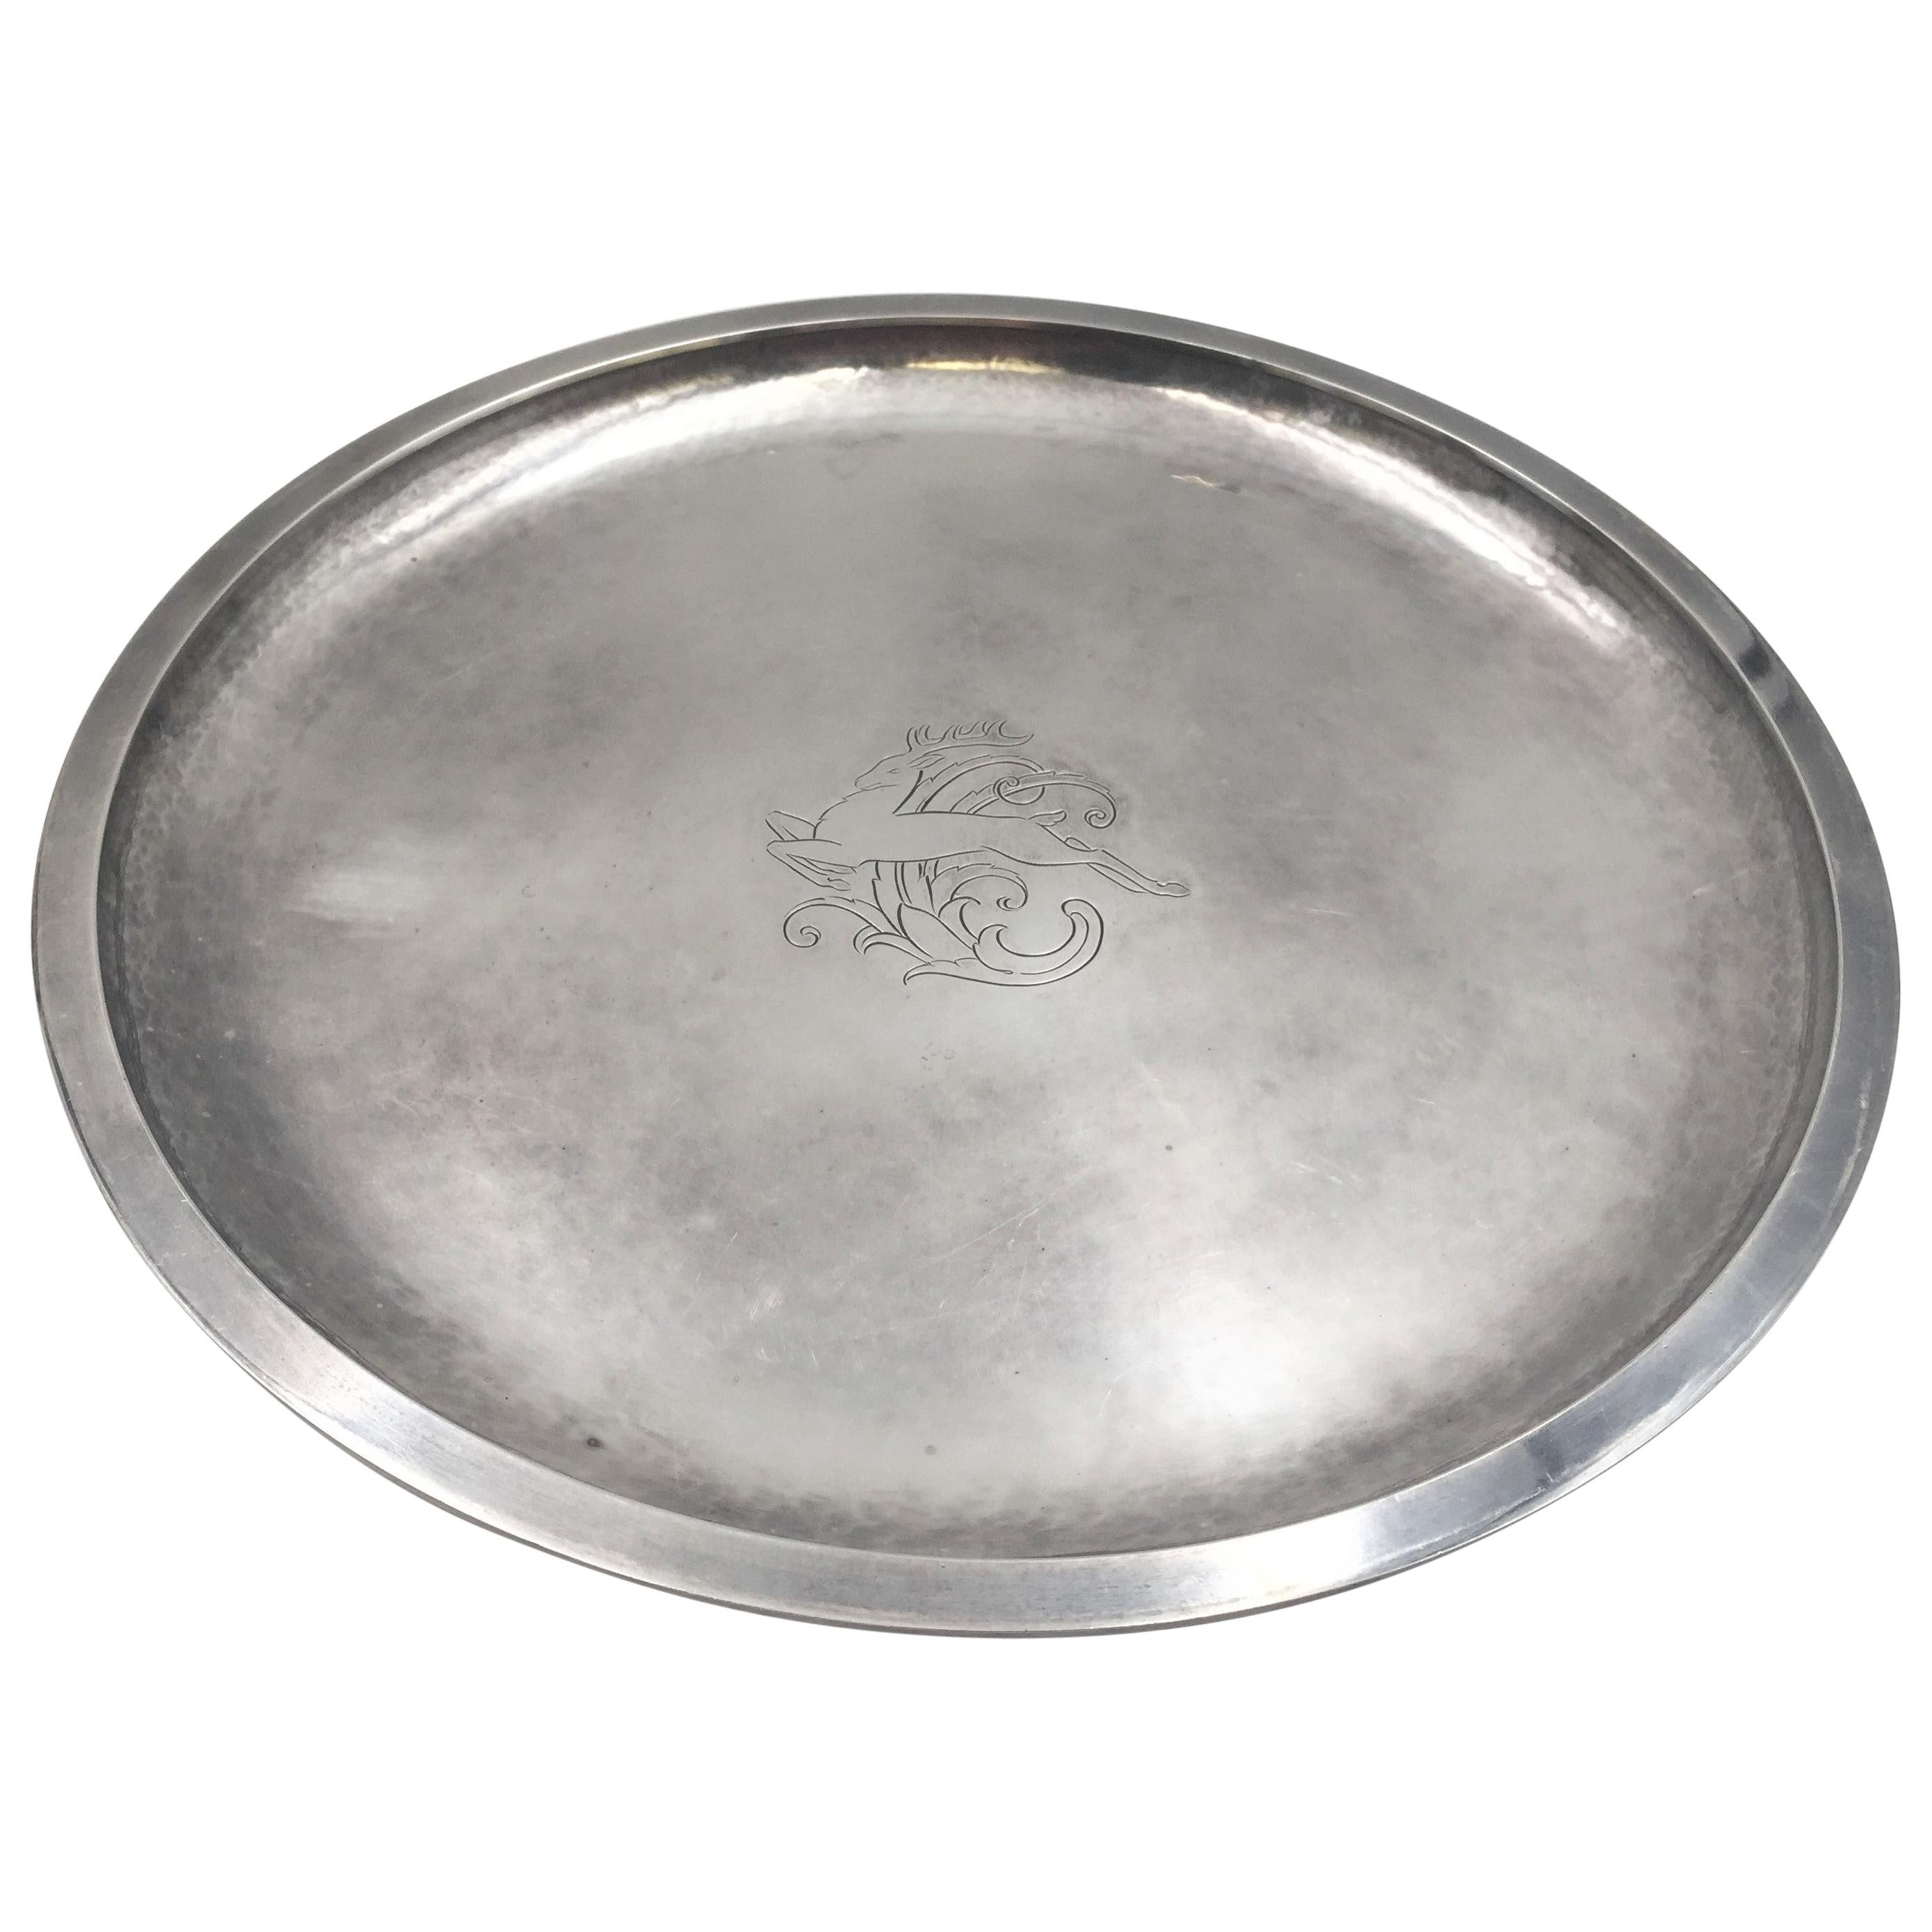 What is a serving tray used for?